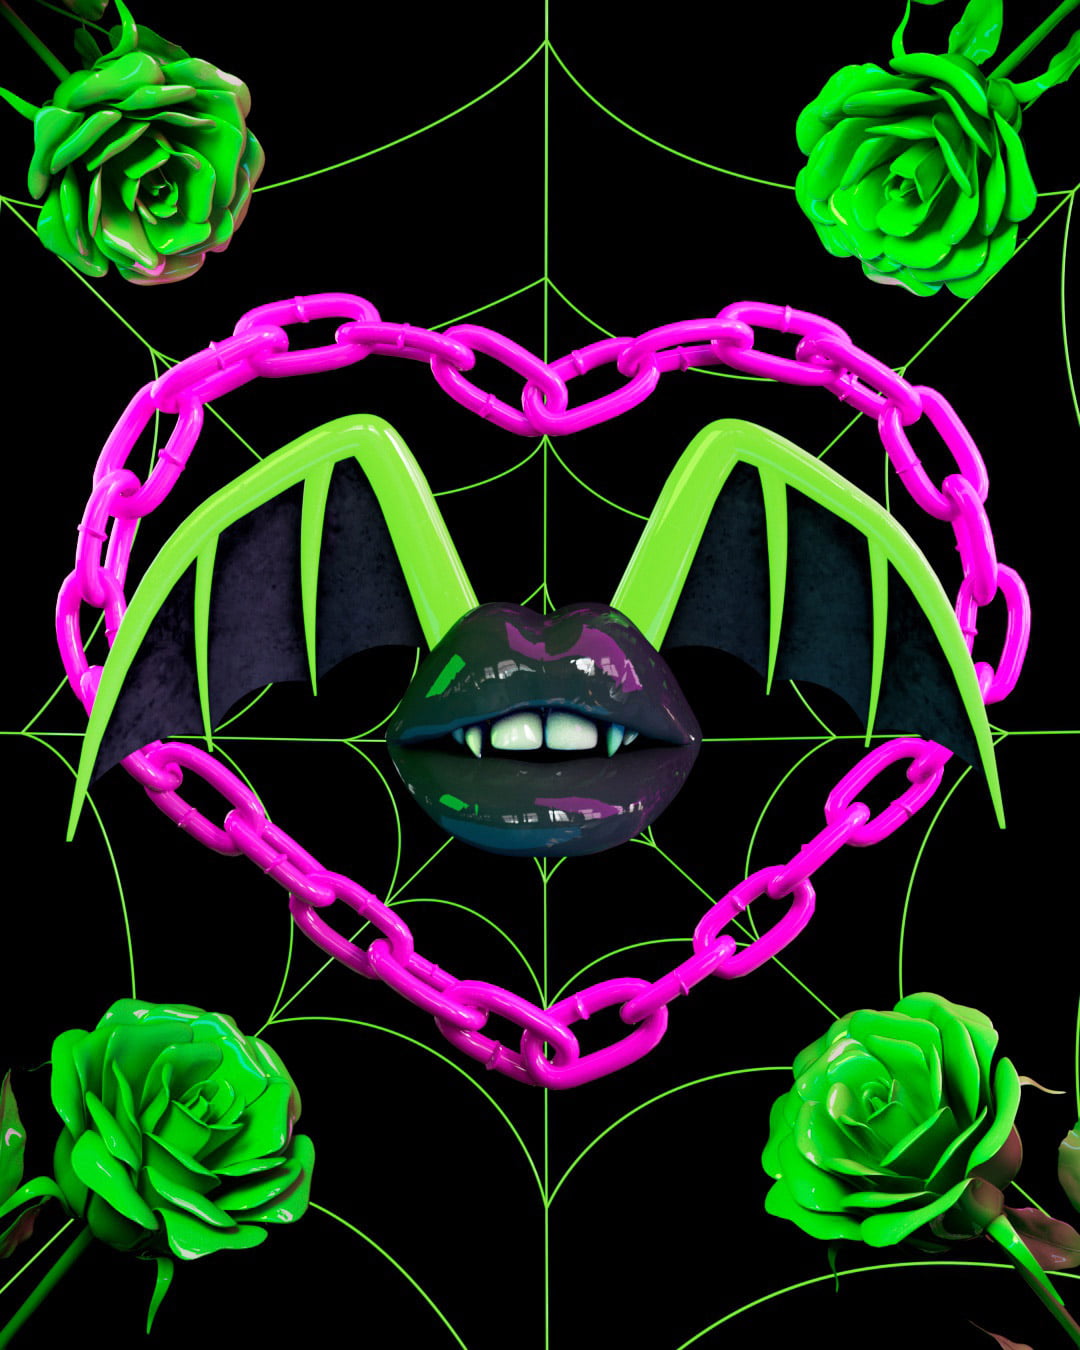 Black background with neon green spiderweb filling the space. Plastic neon green roses on all corners. A neon green plastic heart shaped chain in the center framing juicy black lipstick lips with fangs and neon green and black webbed bat wings.